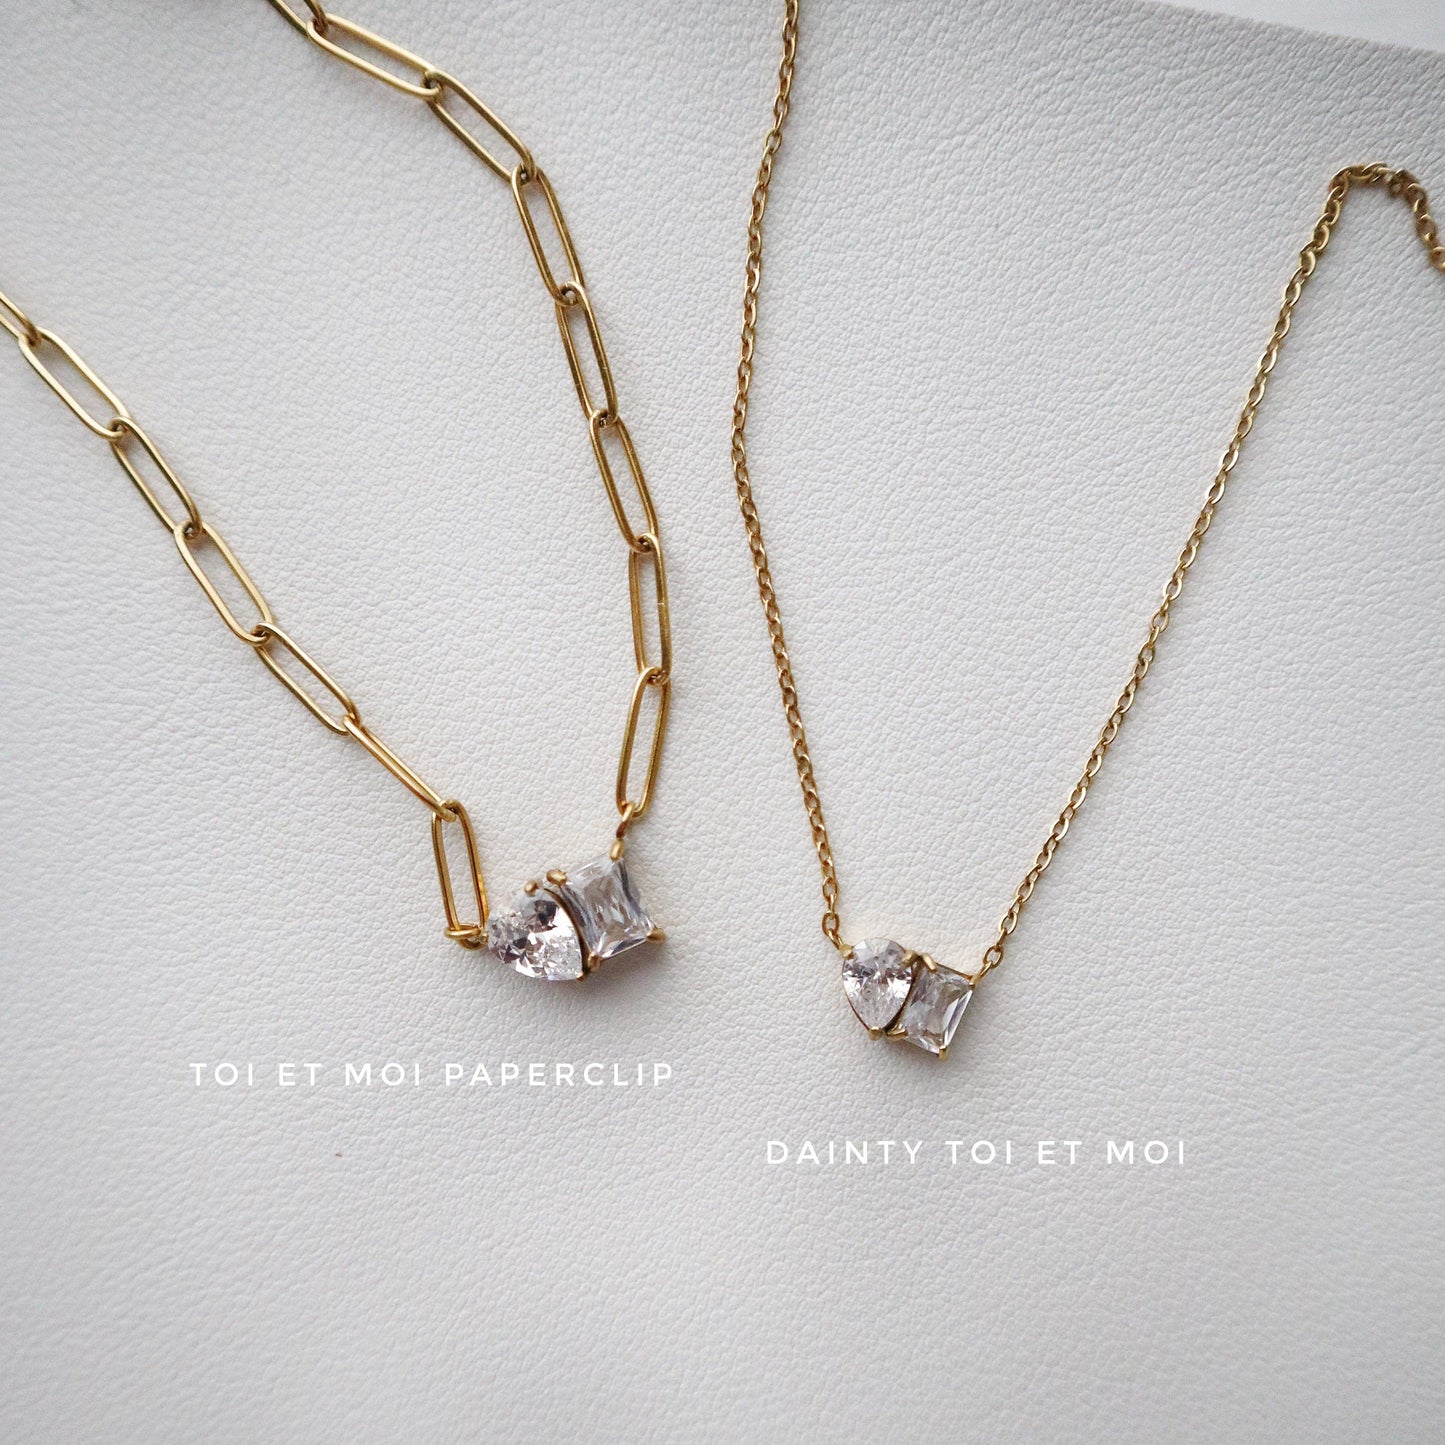 Dainty Toi et Moi Necklace | Pendant Necklace - JESSA JEWELRY | GOLD JEWELRY; dainty, affordable gold everyday jewelry. Tarnish free, water-resistant, hypoallergenic. Jewelry for everyday wear